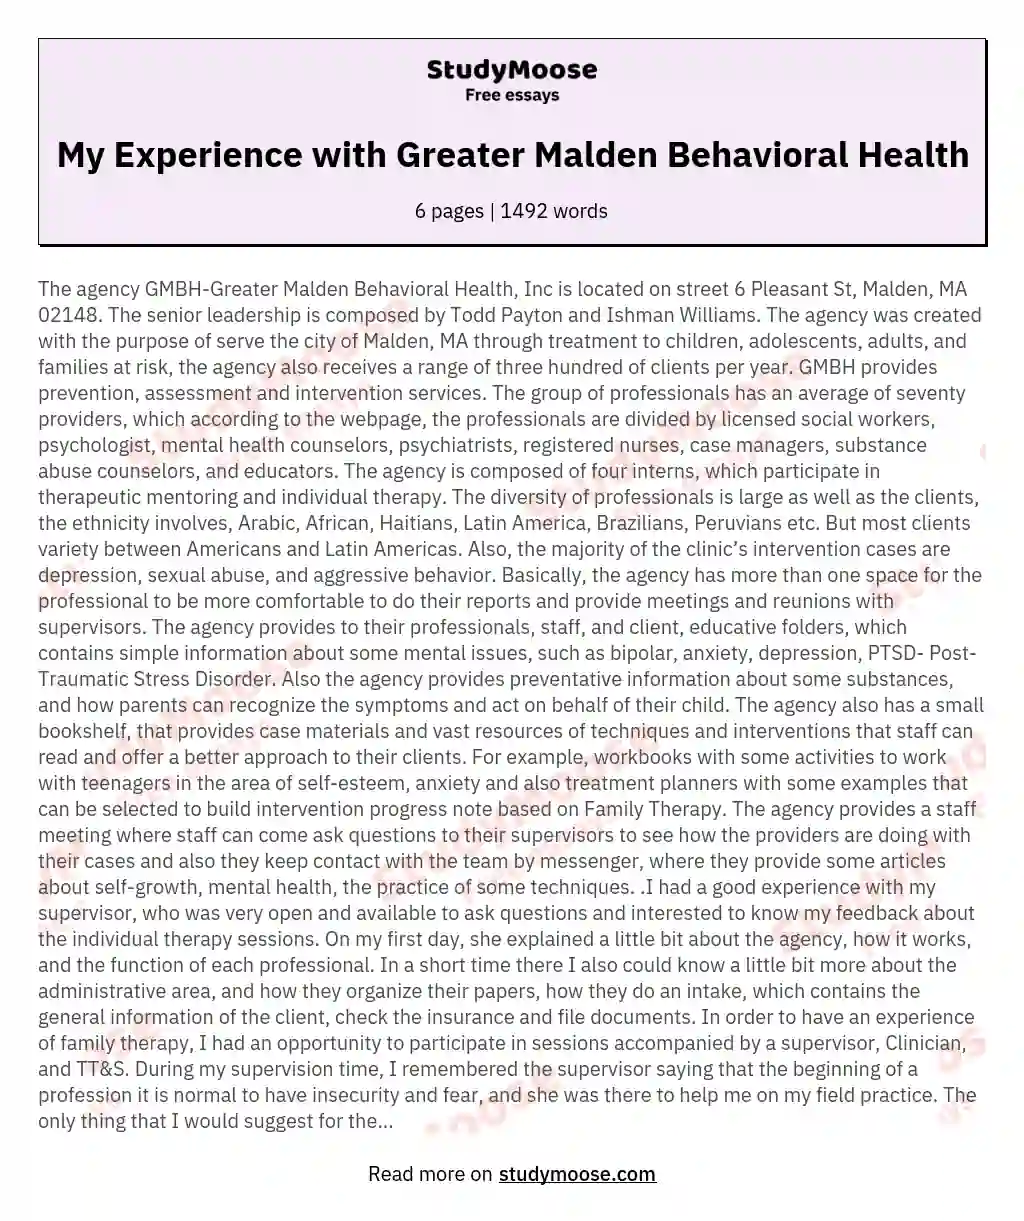 My Experience with Greater Malden Behavioral Health essay